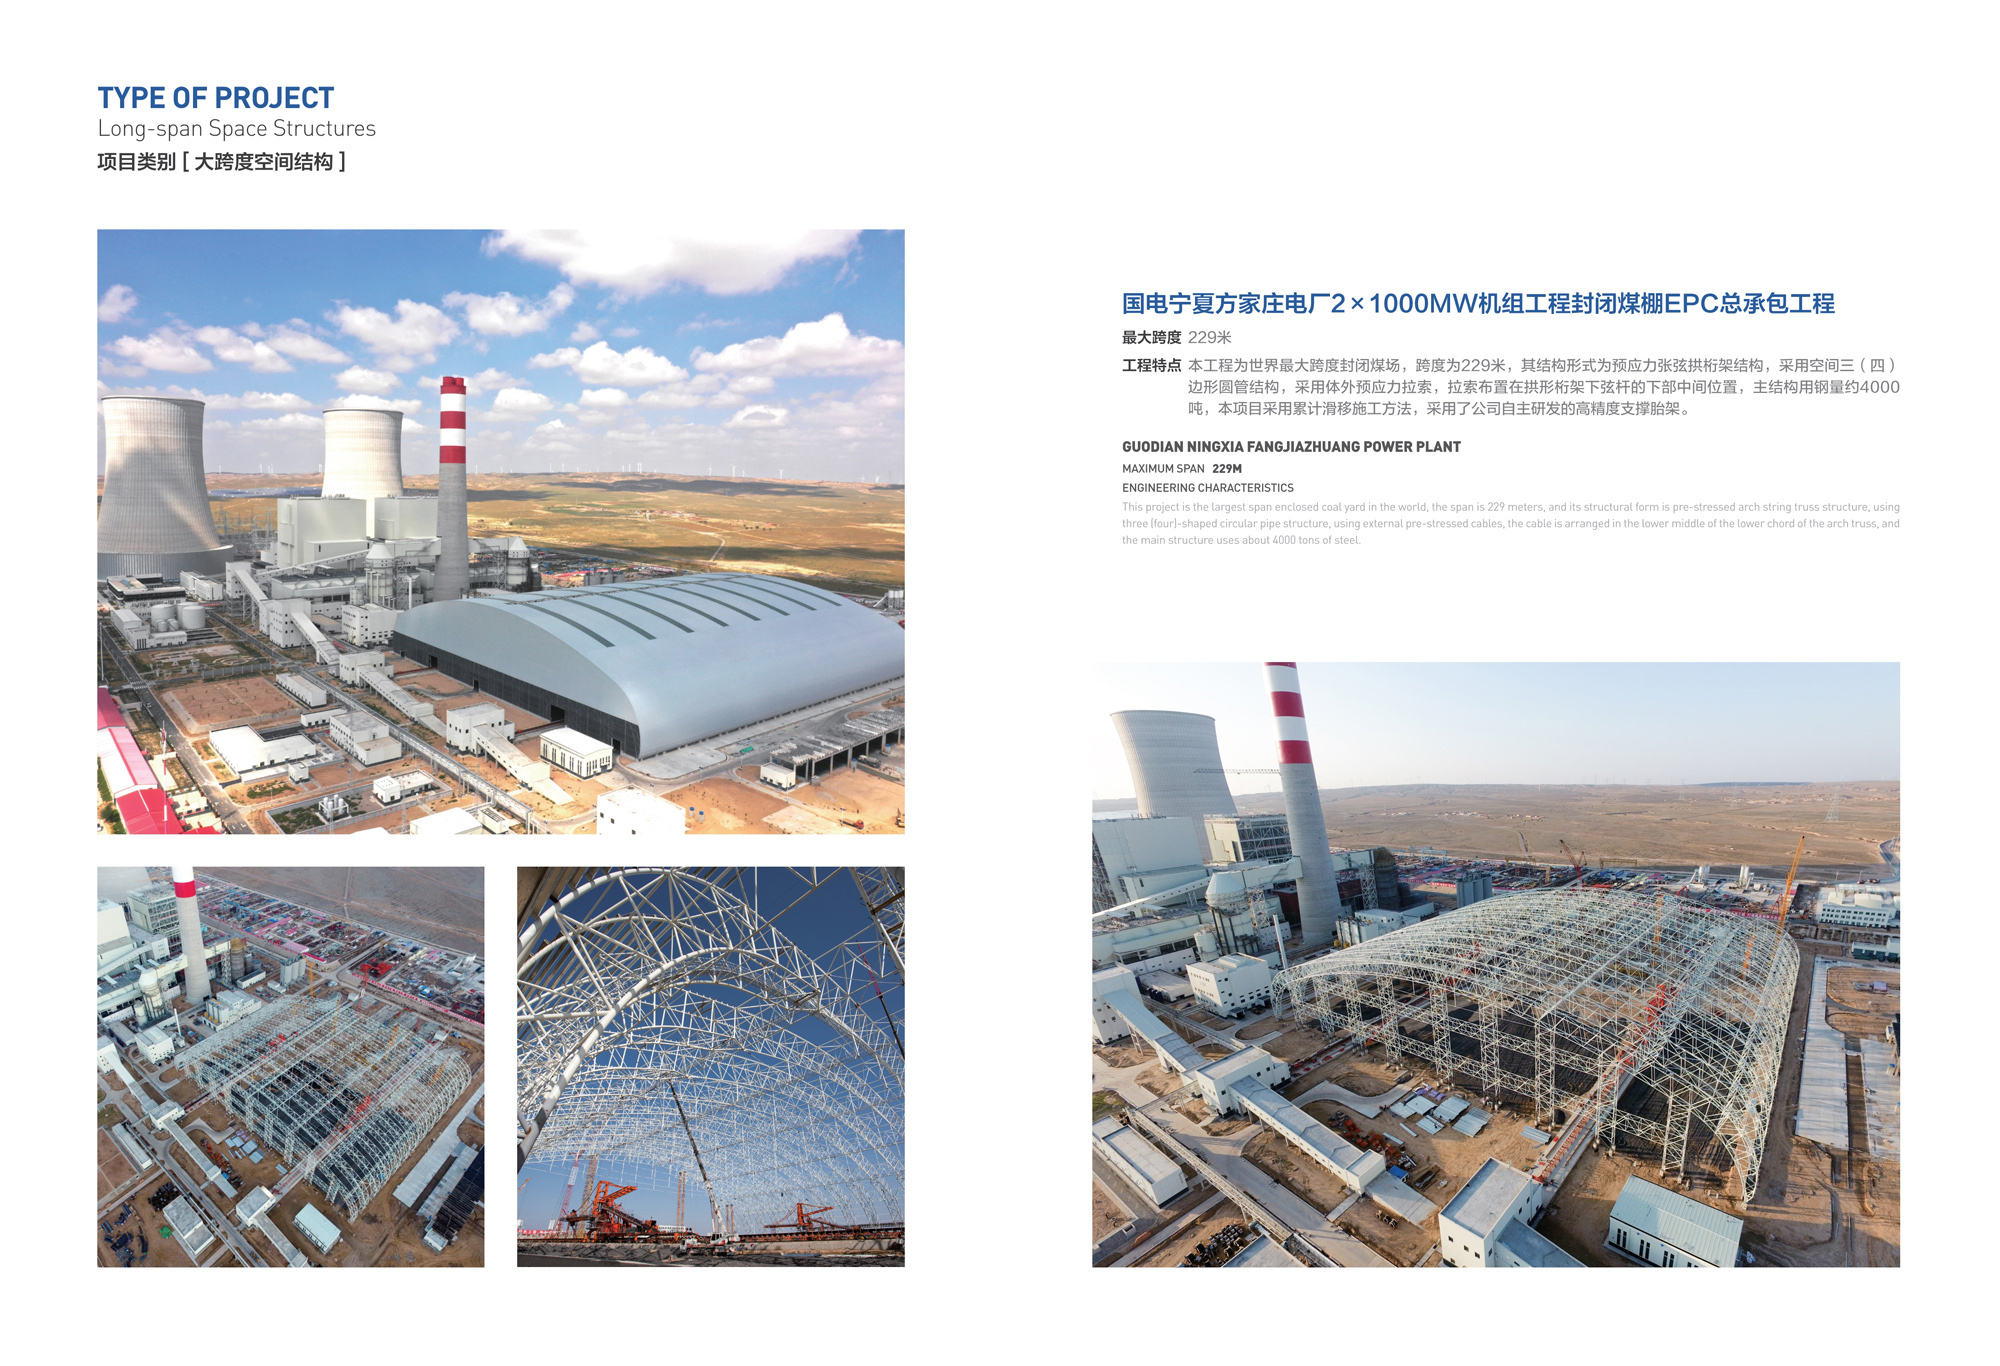 EPC General Contracting Project for Closed Coal Shed of 2x1000MW Unit Project of Guodian Ningxia Fangjiazhuang Power Plant